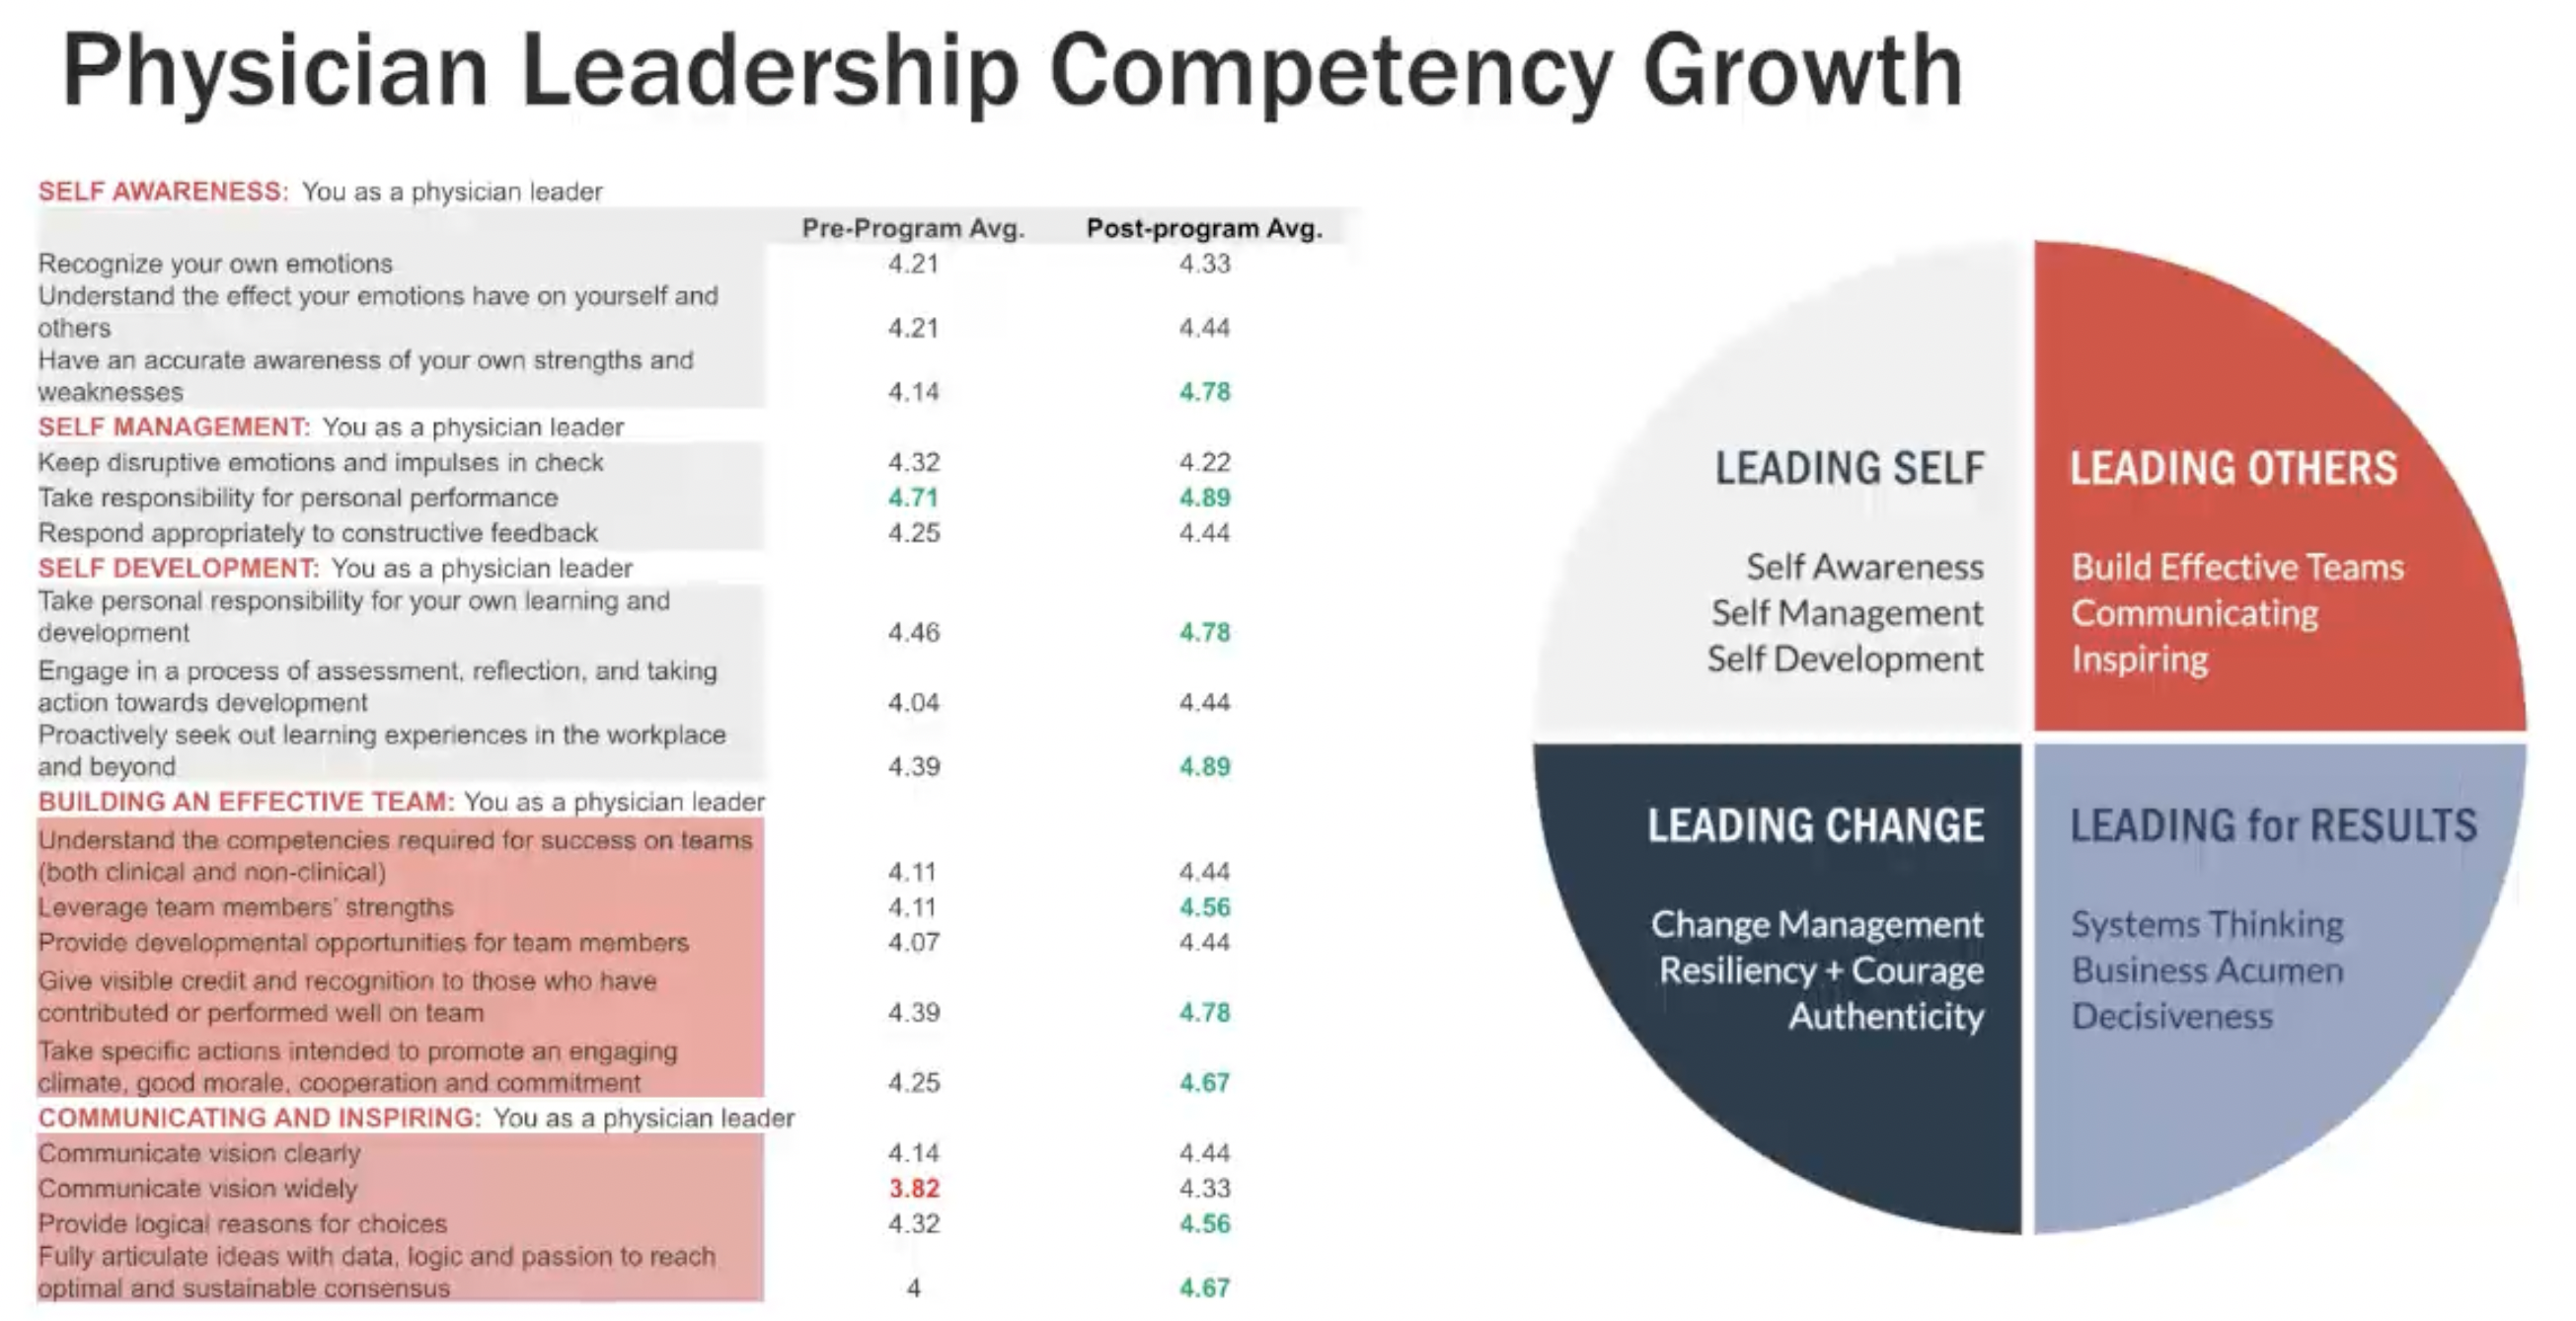 As you’ll see in the chart, any score that improved beyond a 4.5 is highlighted in green to showcase a high post-program-level of expertise by competency.